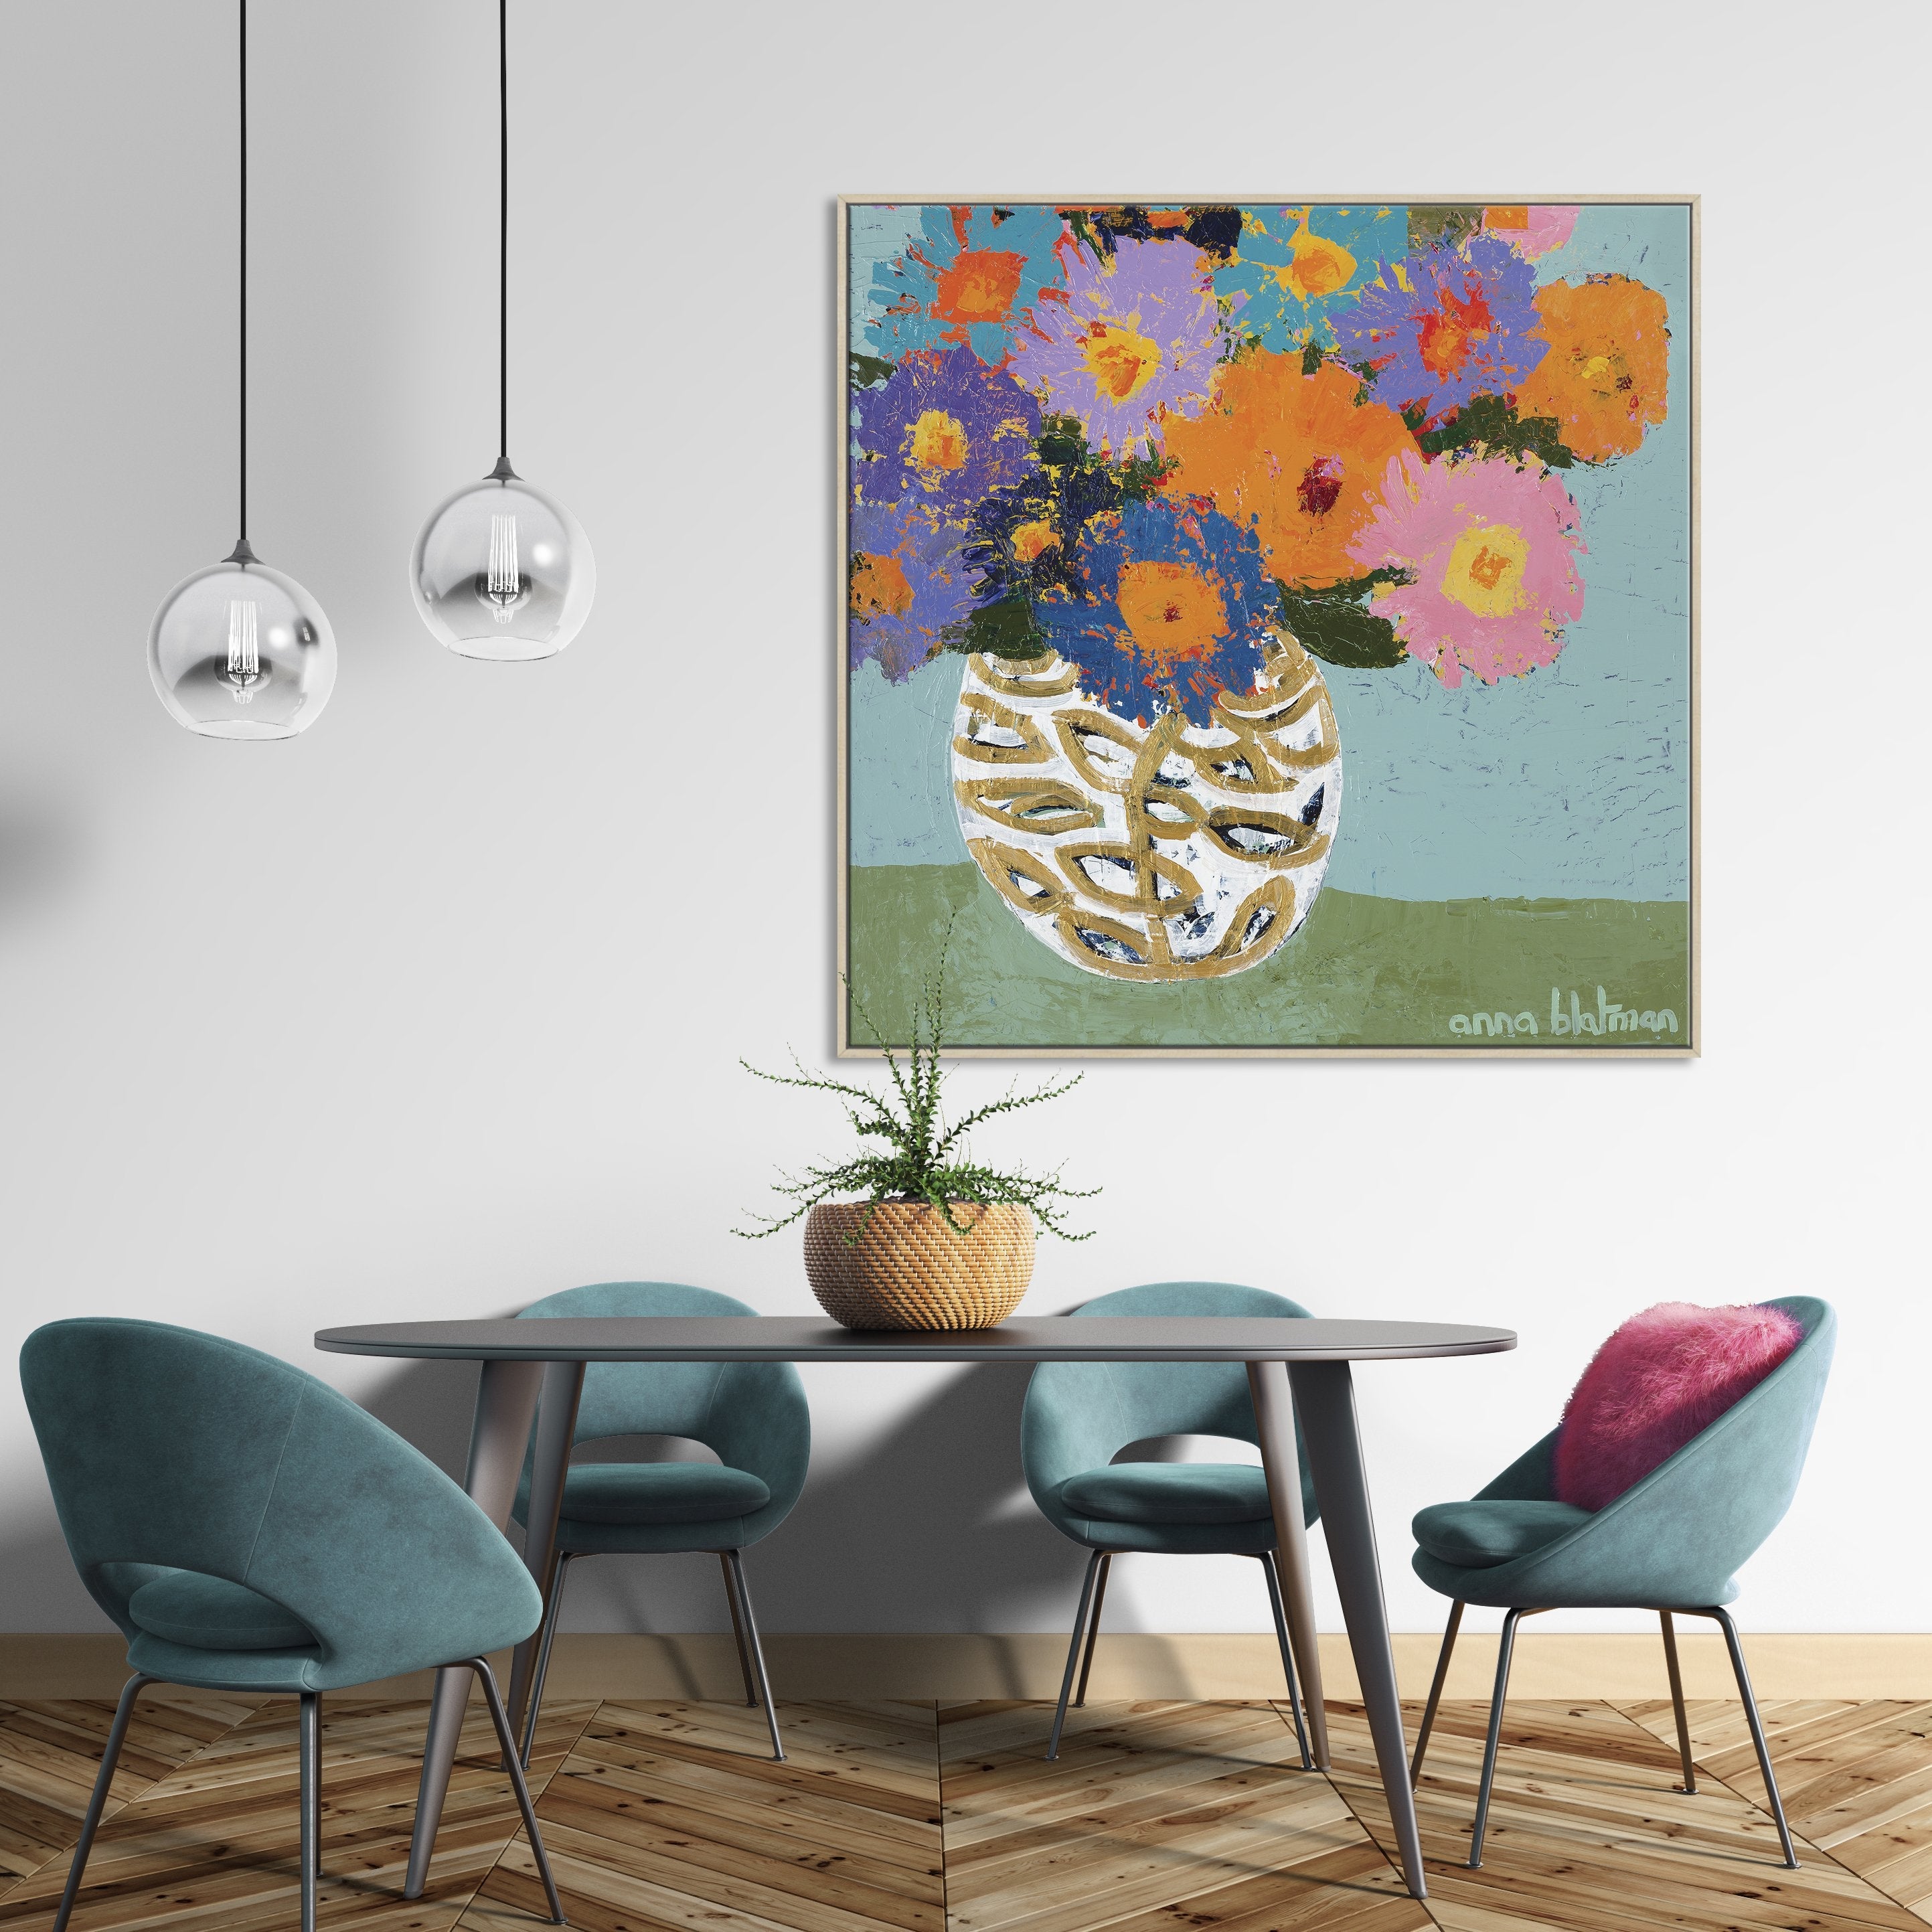 Buffy - Gallery Wrapped Canvas